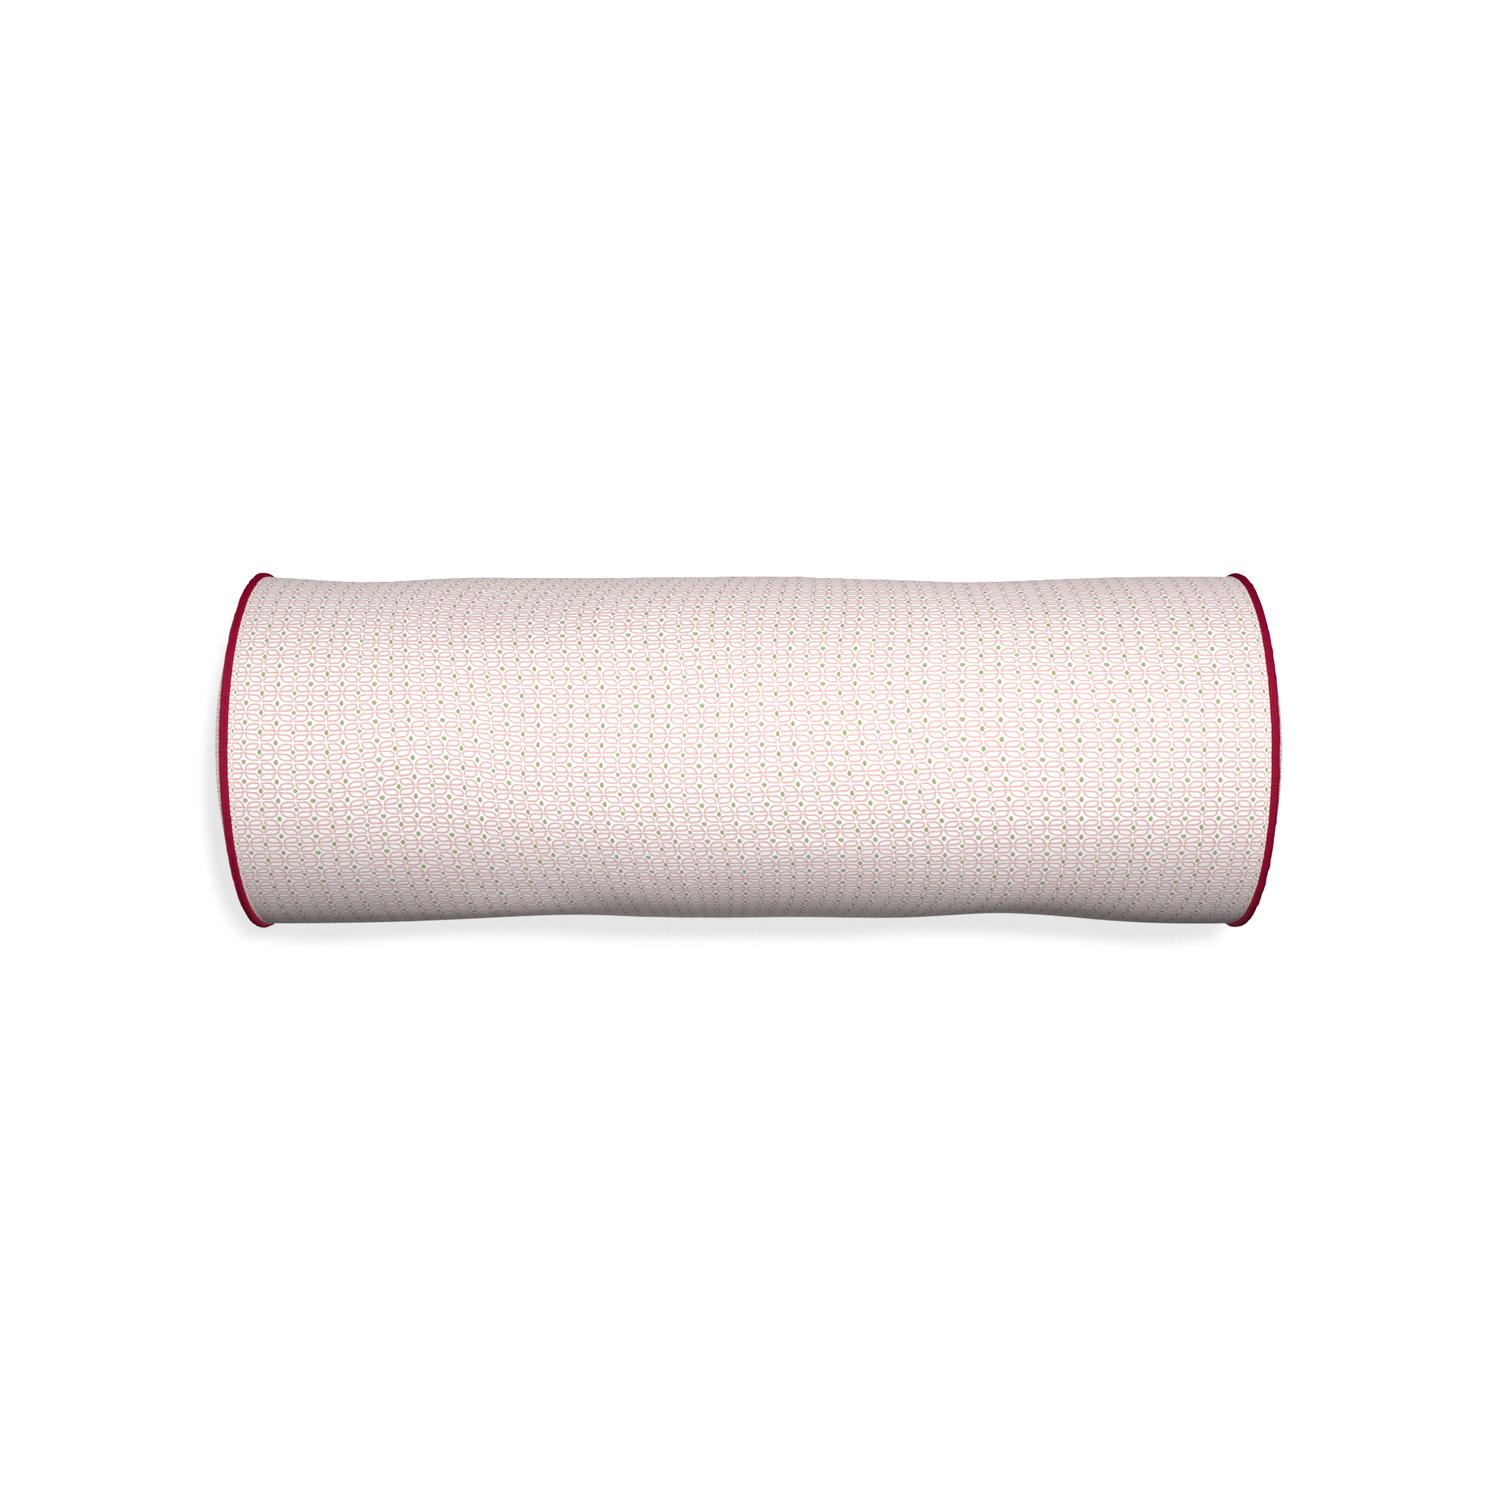 Bolster loomi pink custom pink geometricpillow with raspberry piping on white background